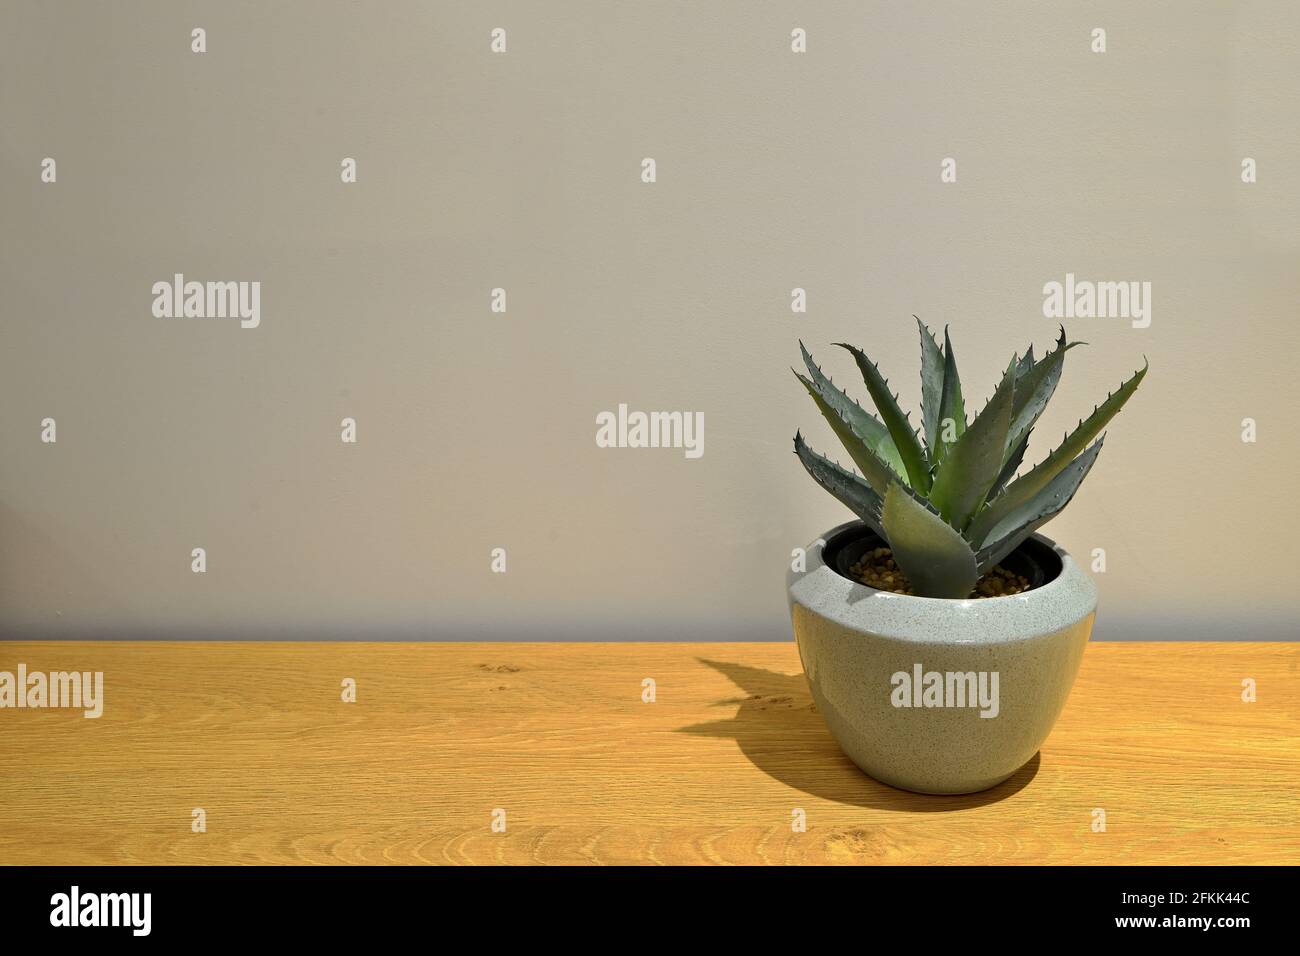 Aloe vera flower in a pot on a wooden table. Gray smooth wall background. Evergreen flower on a wooden and uniform gray background. Flower with thorns Stock Photo